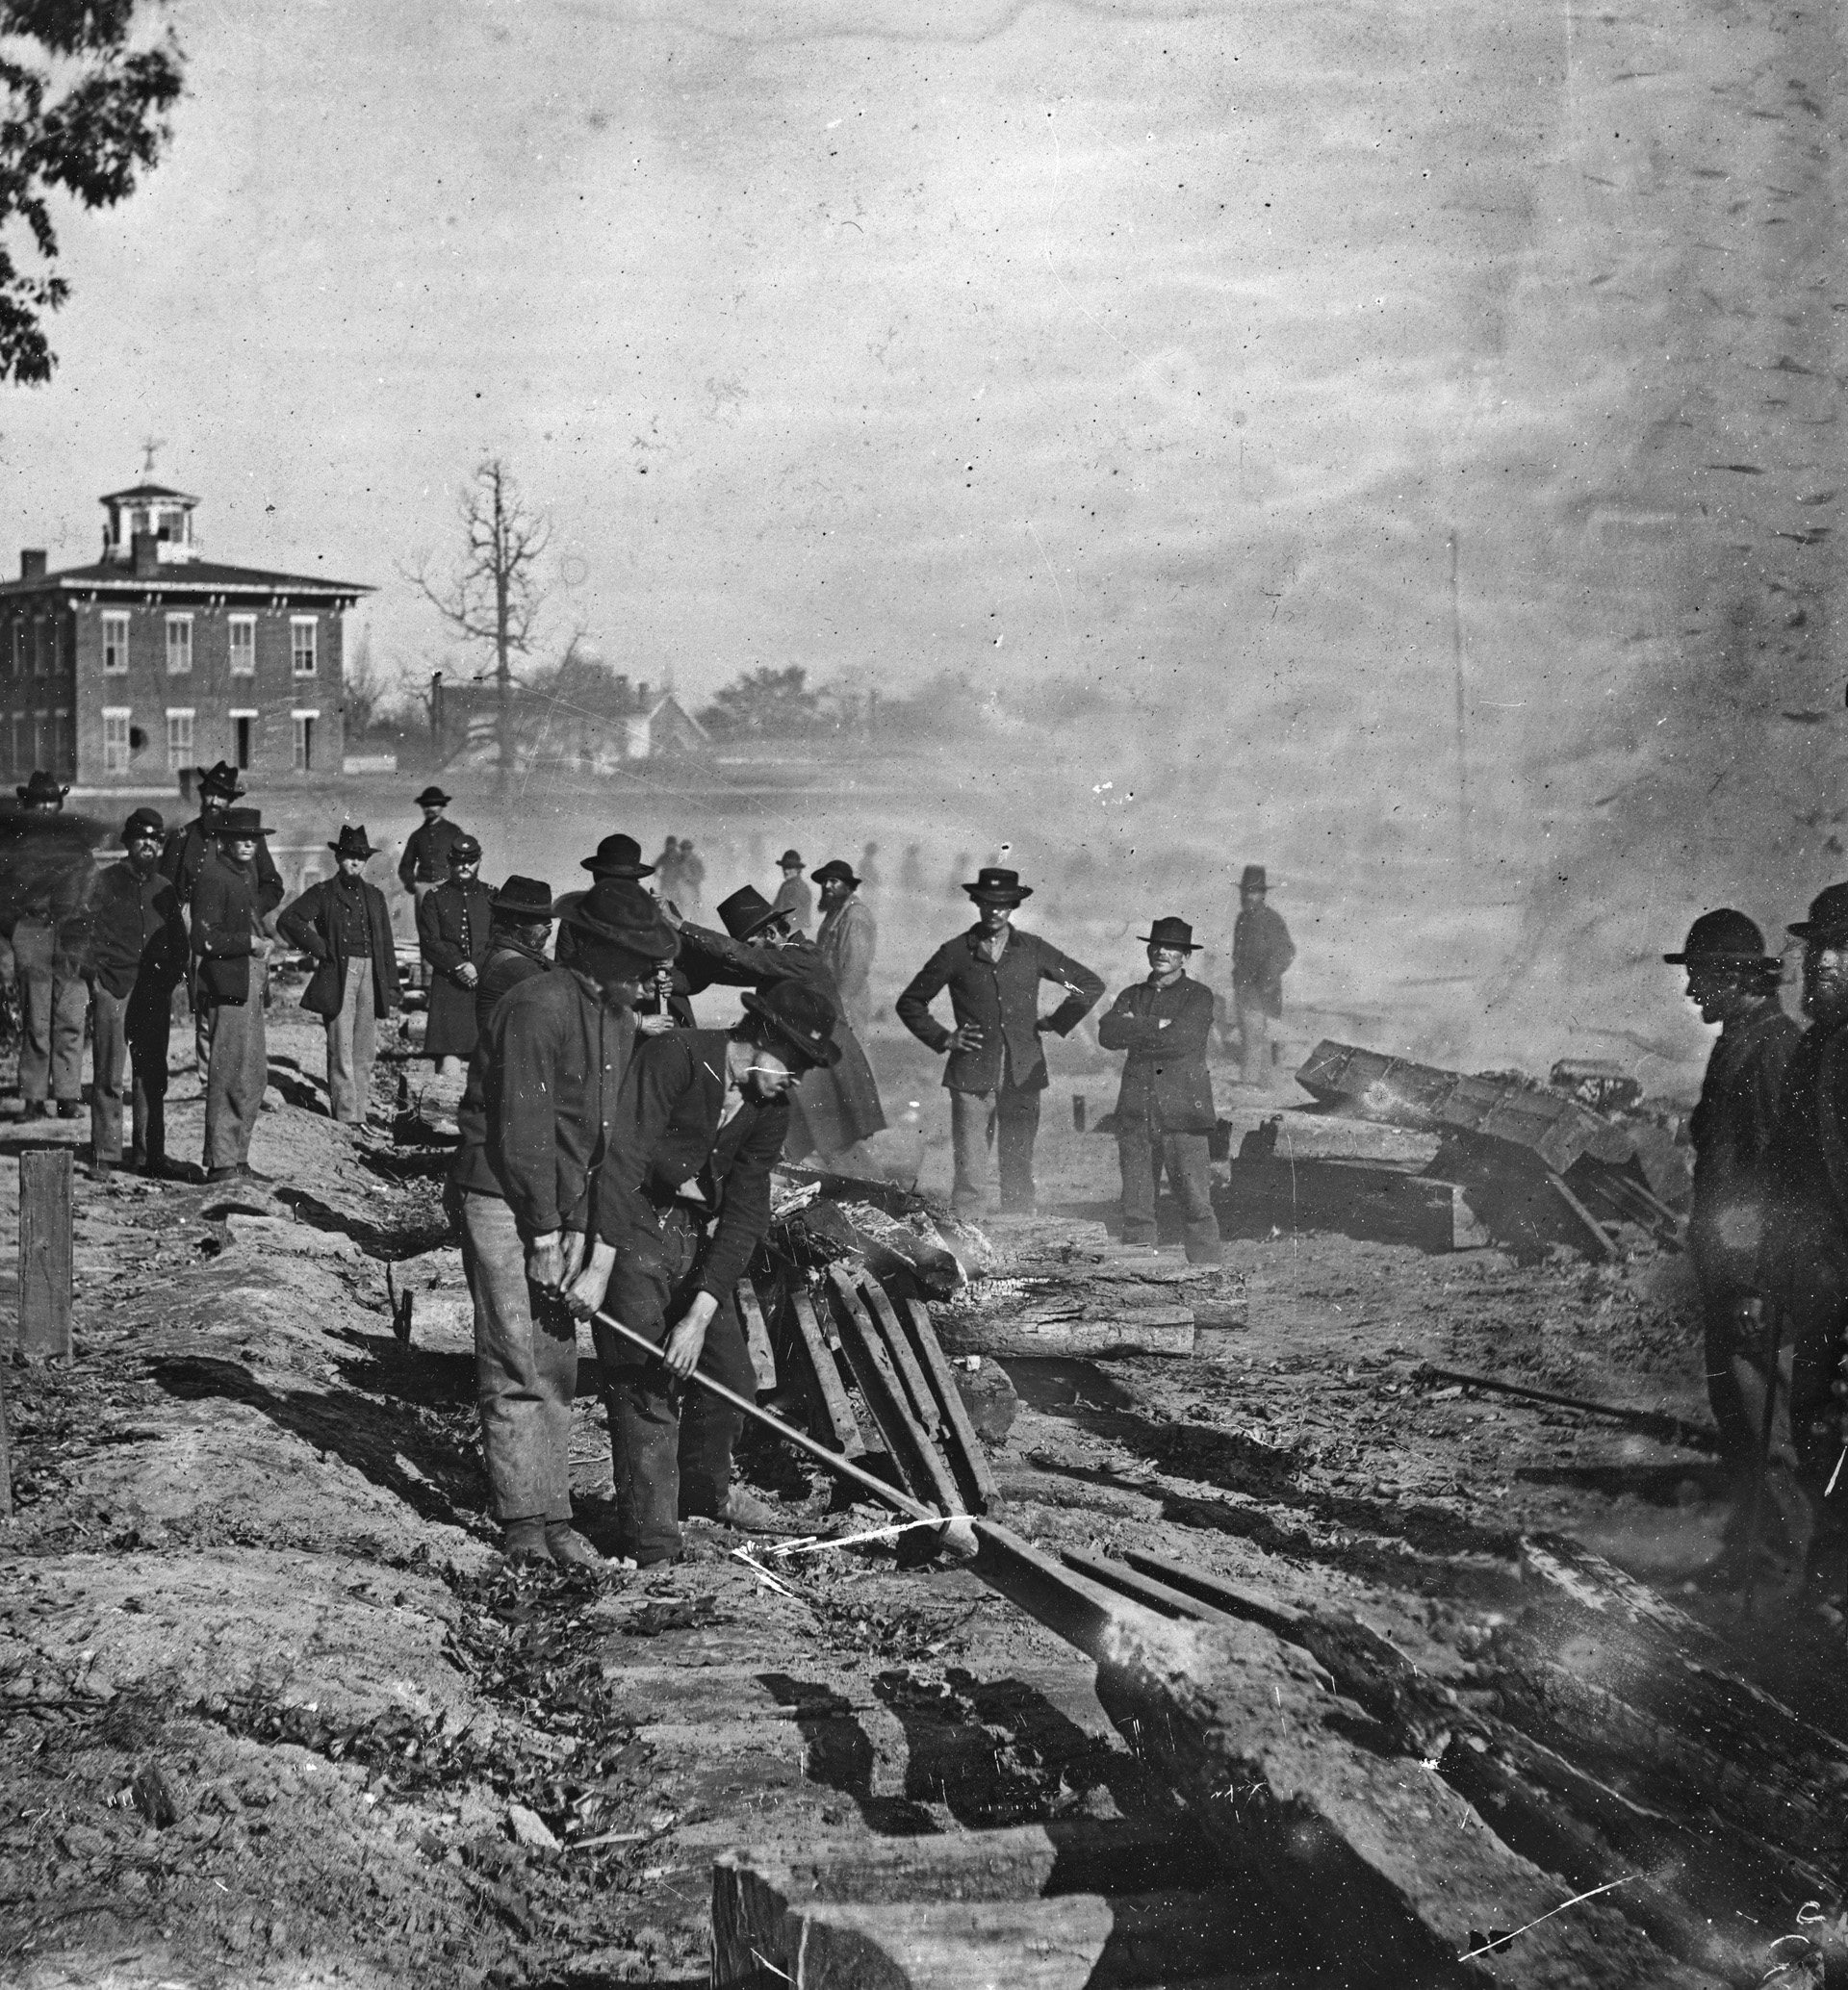 Maj. Gen. William Tecumseh Sherman’s notorious “bummers” destroy a section of railroad at Atlanta, Georgia, in the summer of 1864. Photographer George N. Barnard was one of the few to record the Civil War in the Western theater.